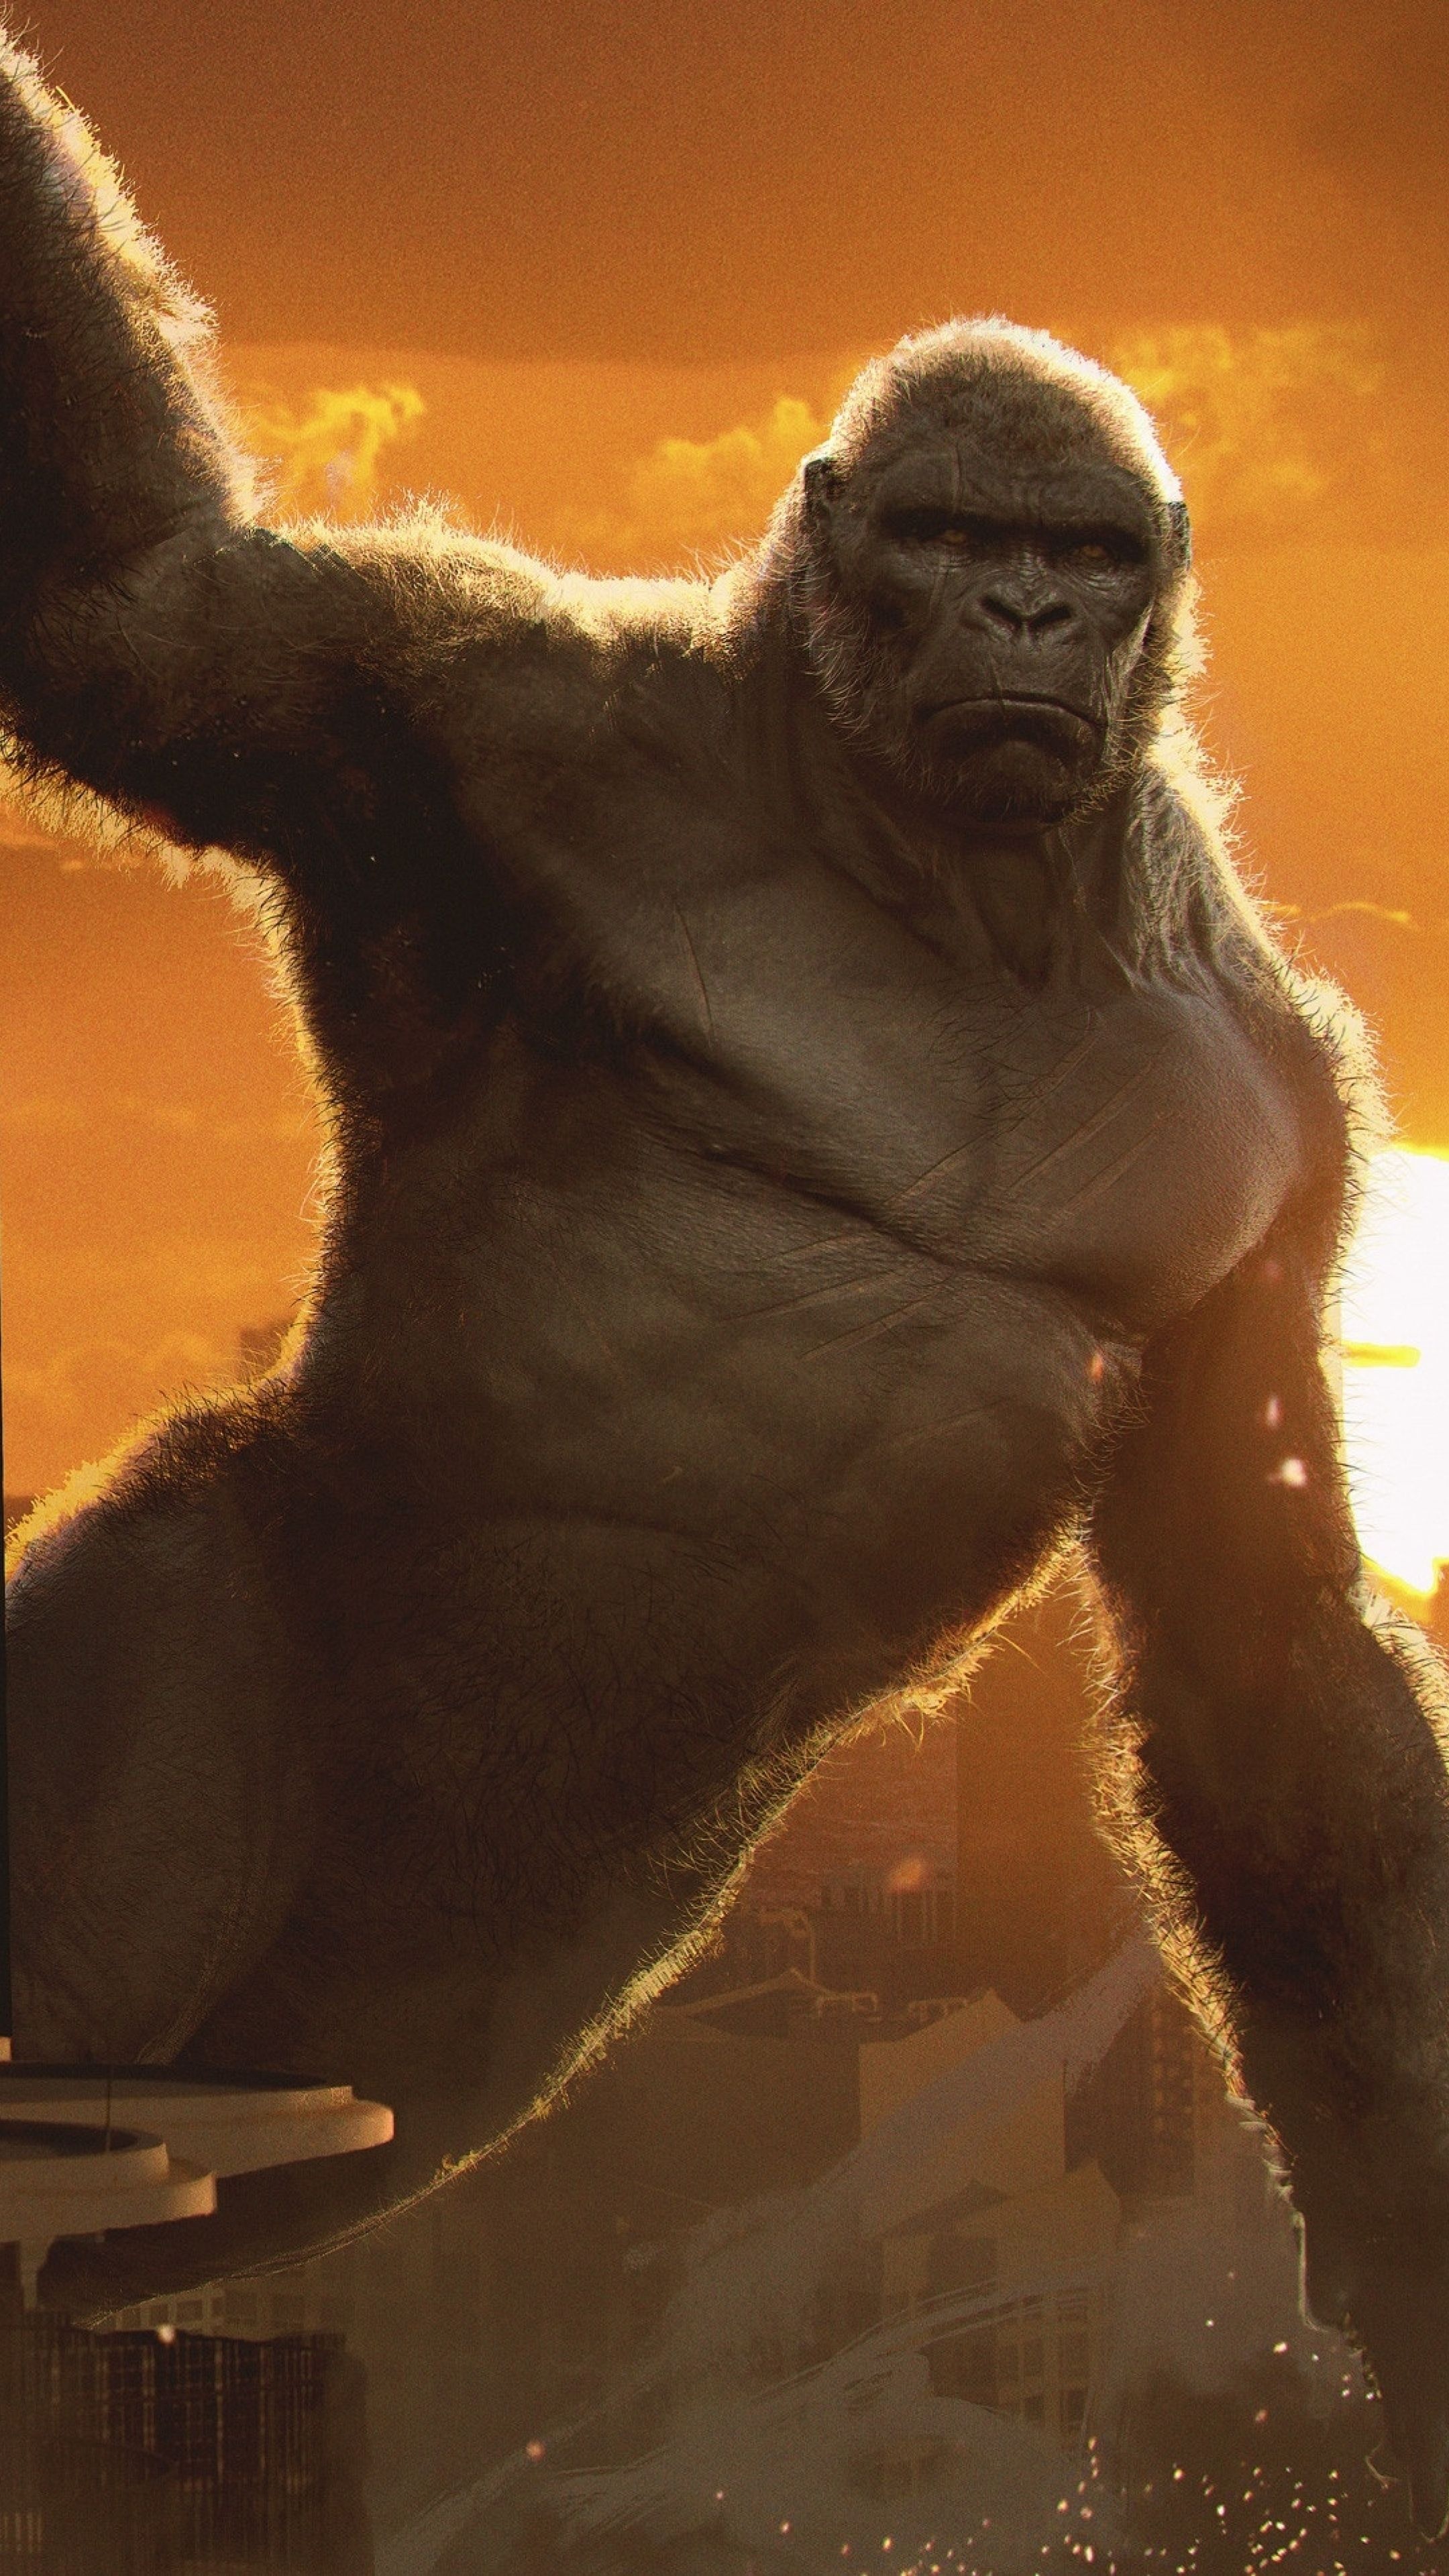 King Kong: One of the most iconic movie monsters of all time, Illustration. 2160x3840 4K Wallpaper.